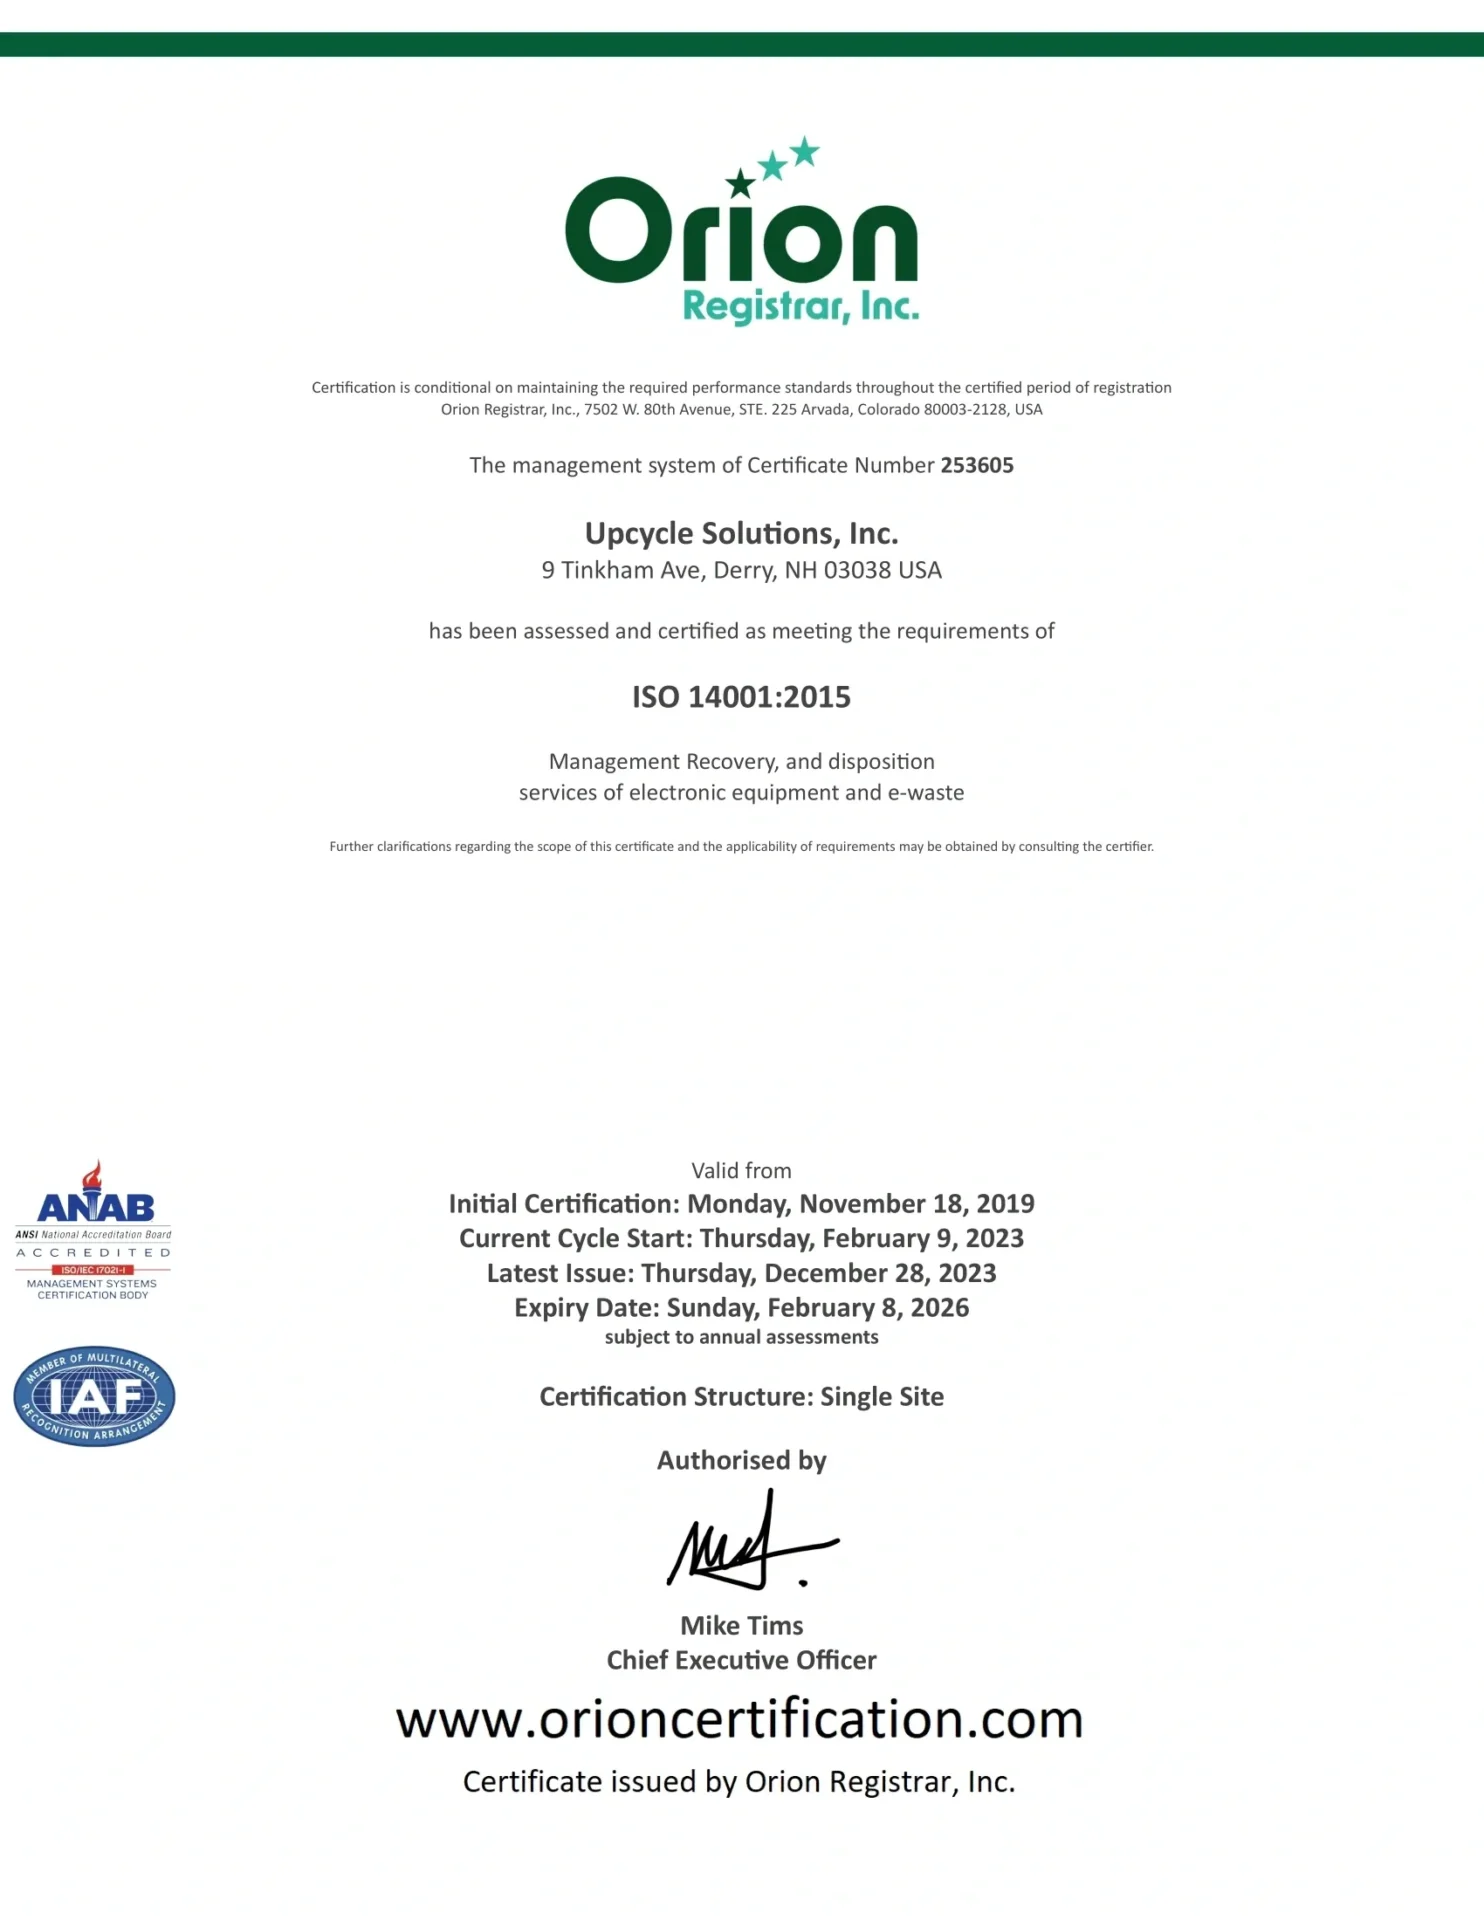 An image of a certificate for orion